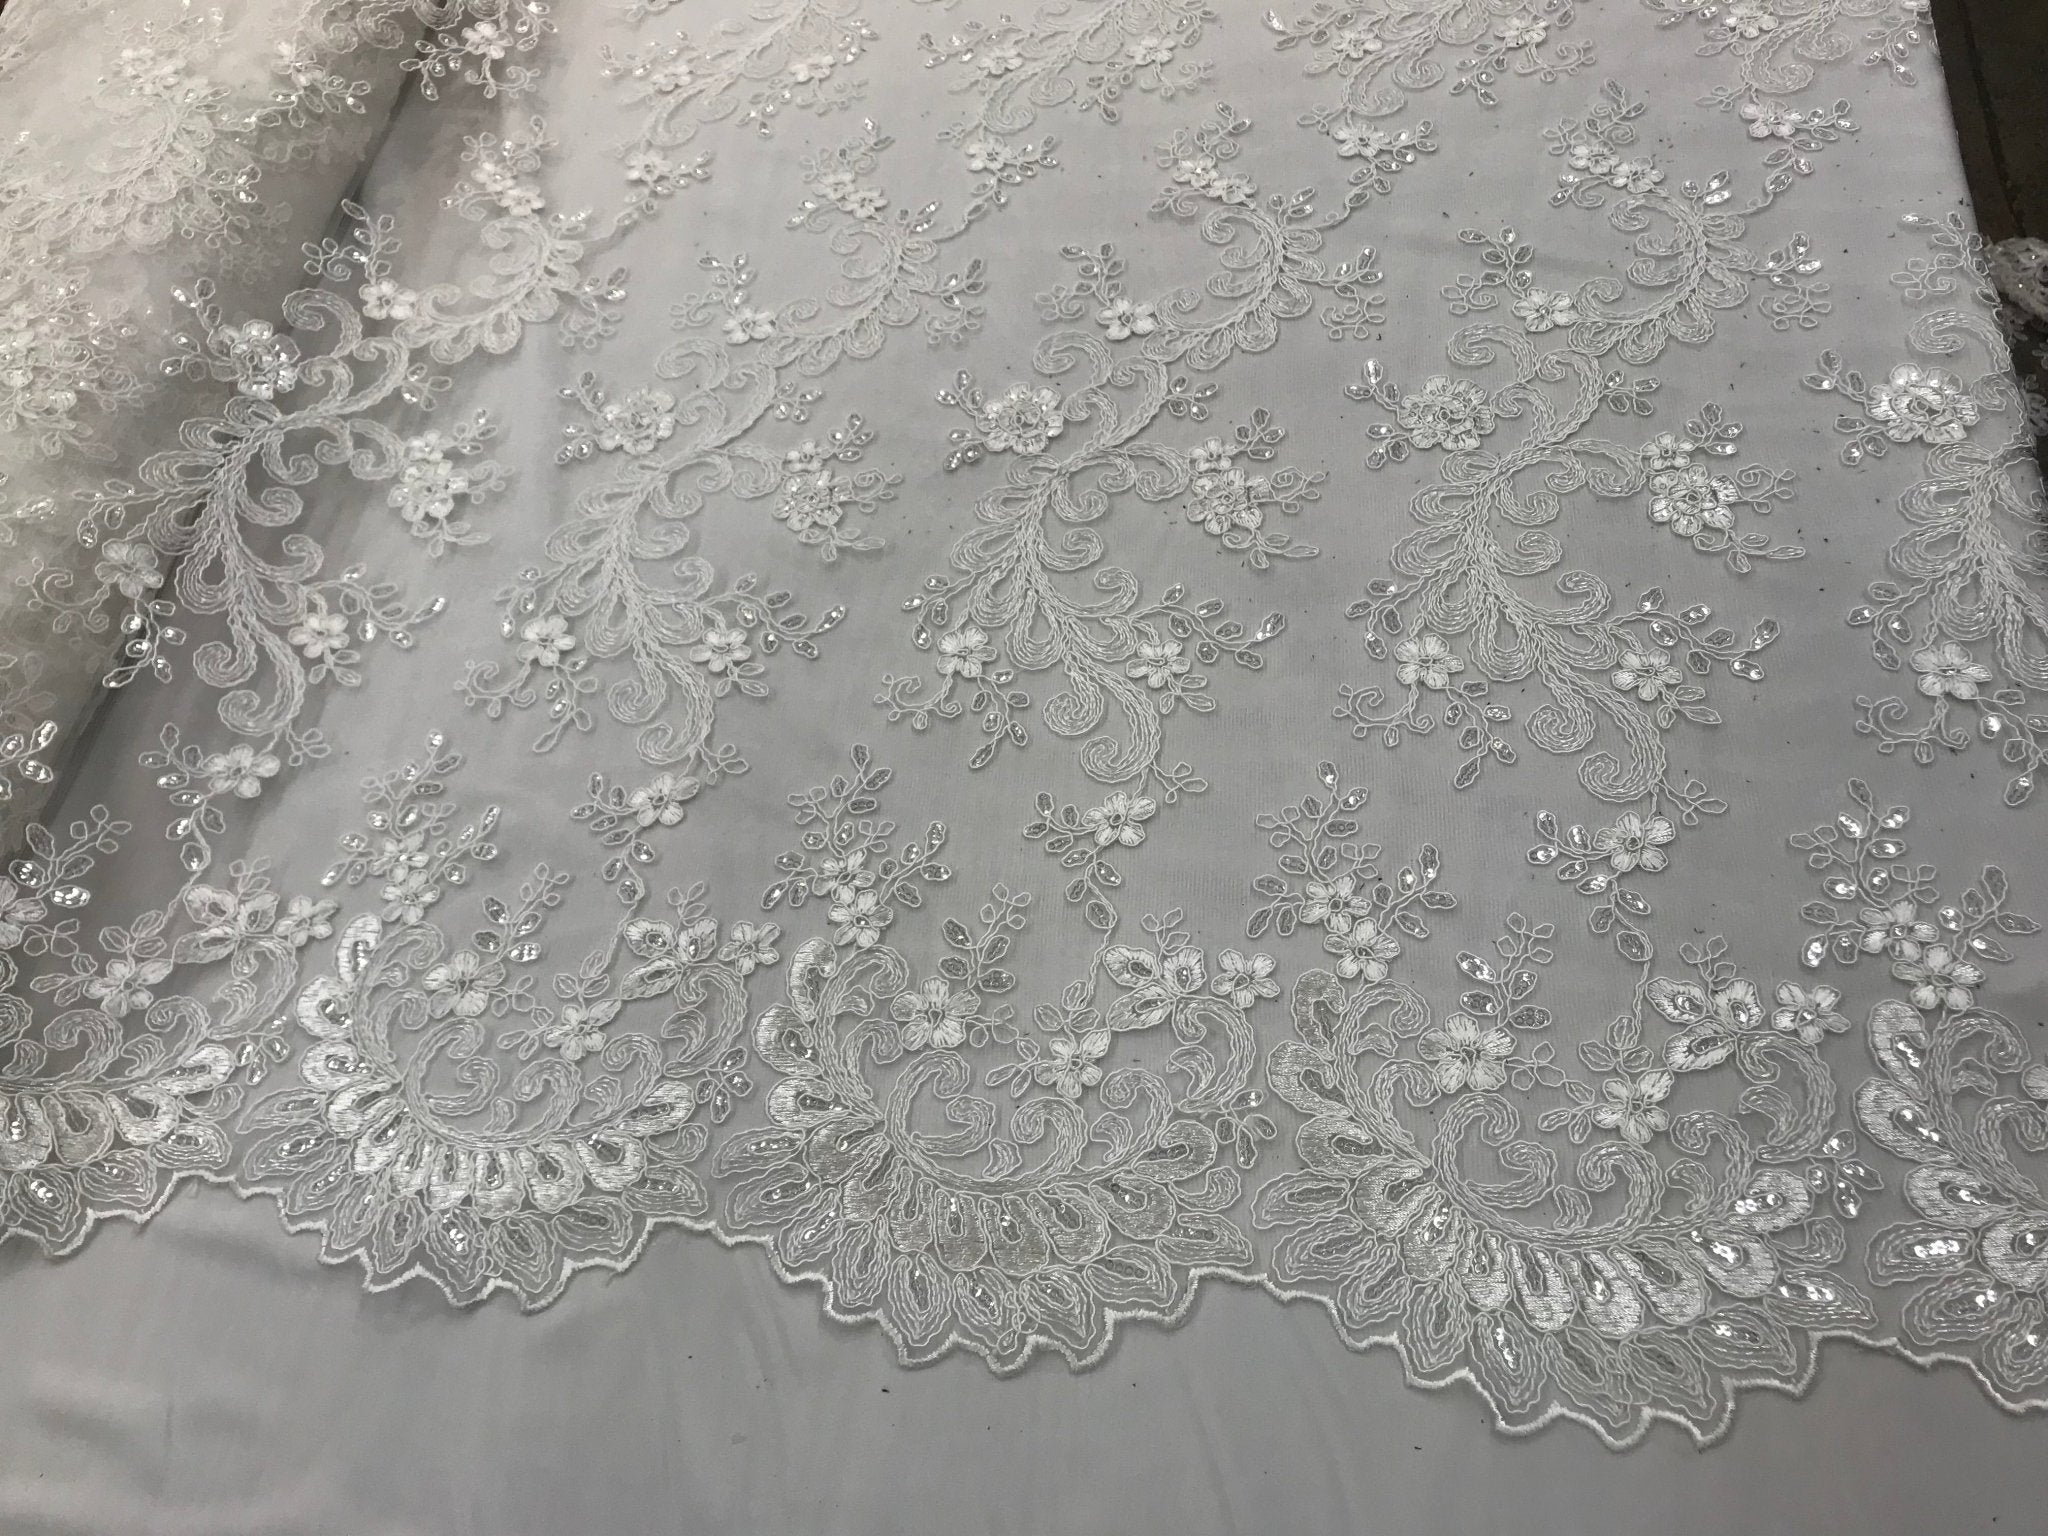 Ivory Design shop prom Bridal Design transparent Fabric Mesh lace Embroidered wedding decoration night gowns tablecloths fashion dressesICE FABRICSICE FABRICSIvory Design shop prom Bridal Design transparent Fabric Mesh lace Embroidered wedding decoration night gowns tablecloths fashion dresses ICE FABRICS